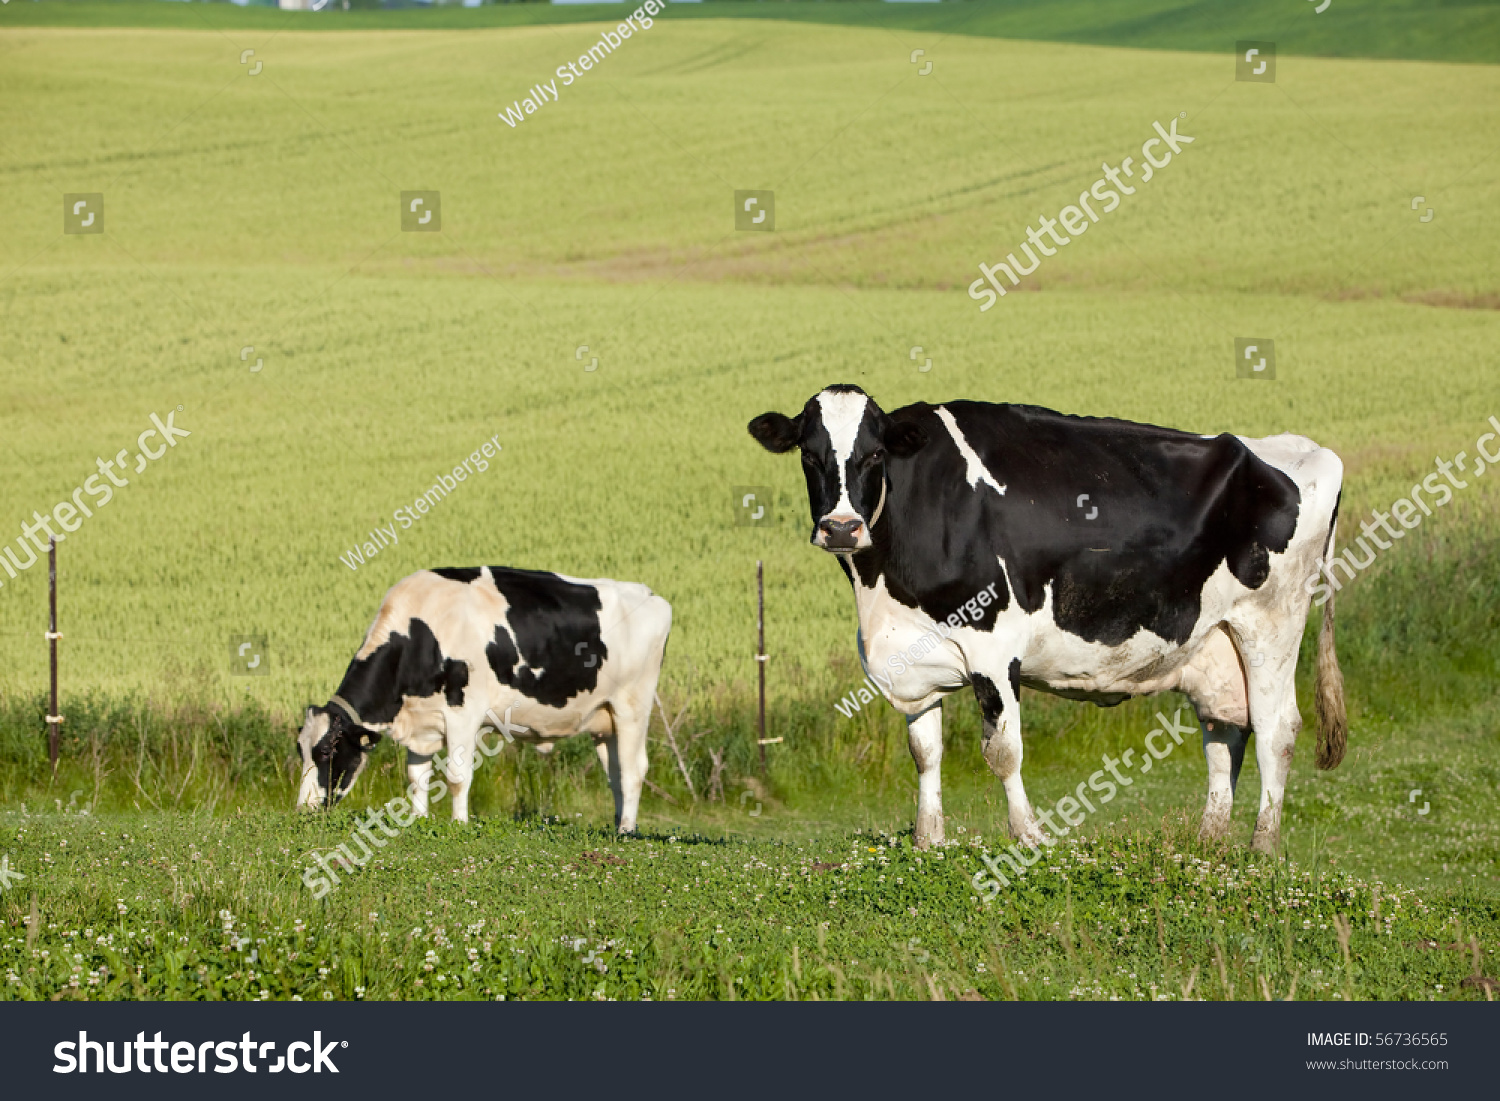 Black White Dairy Jersey Cow Pasture Stock Photo Edit Now 56736565